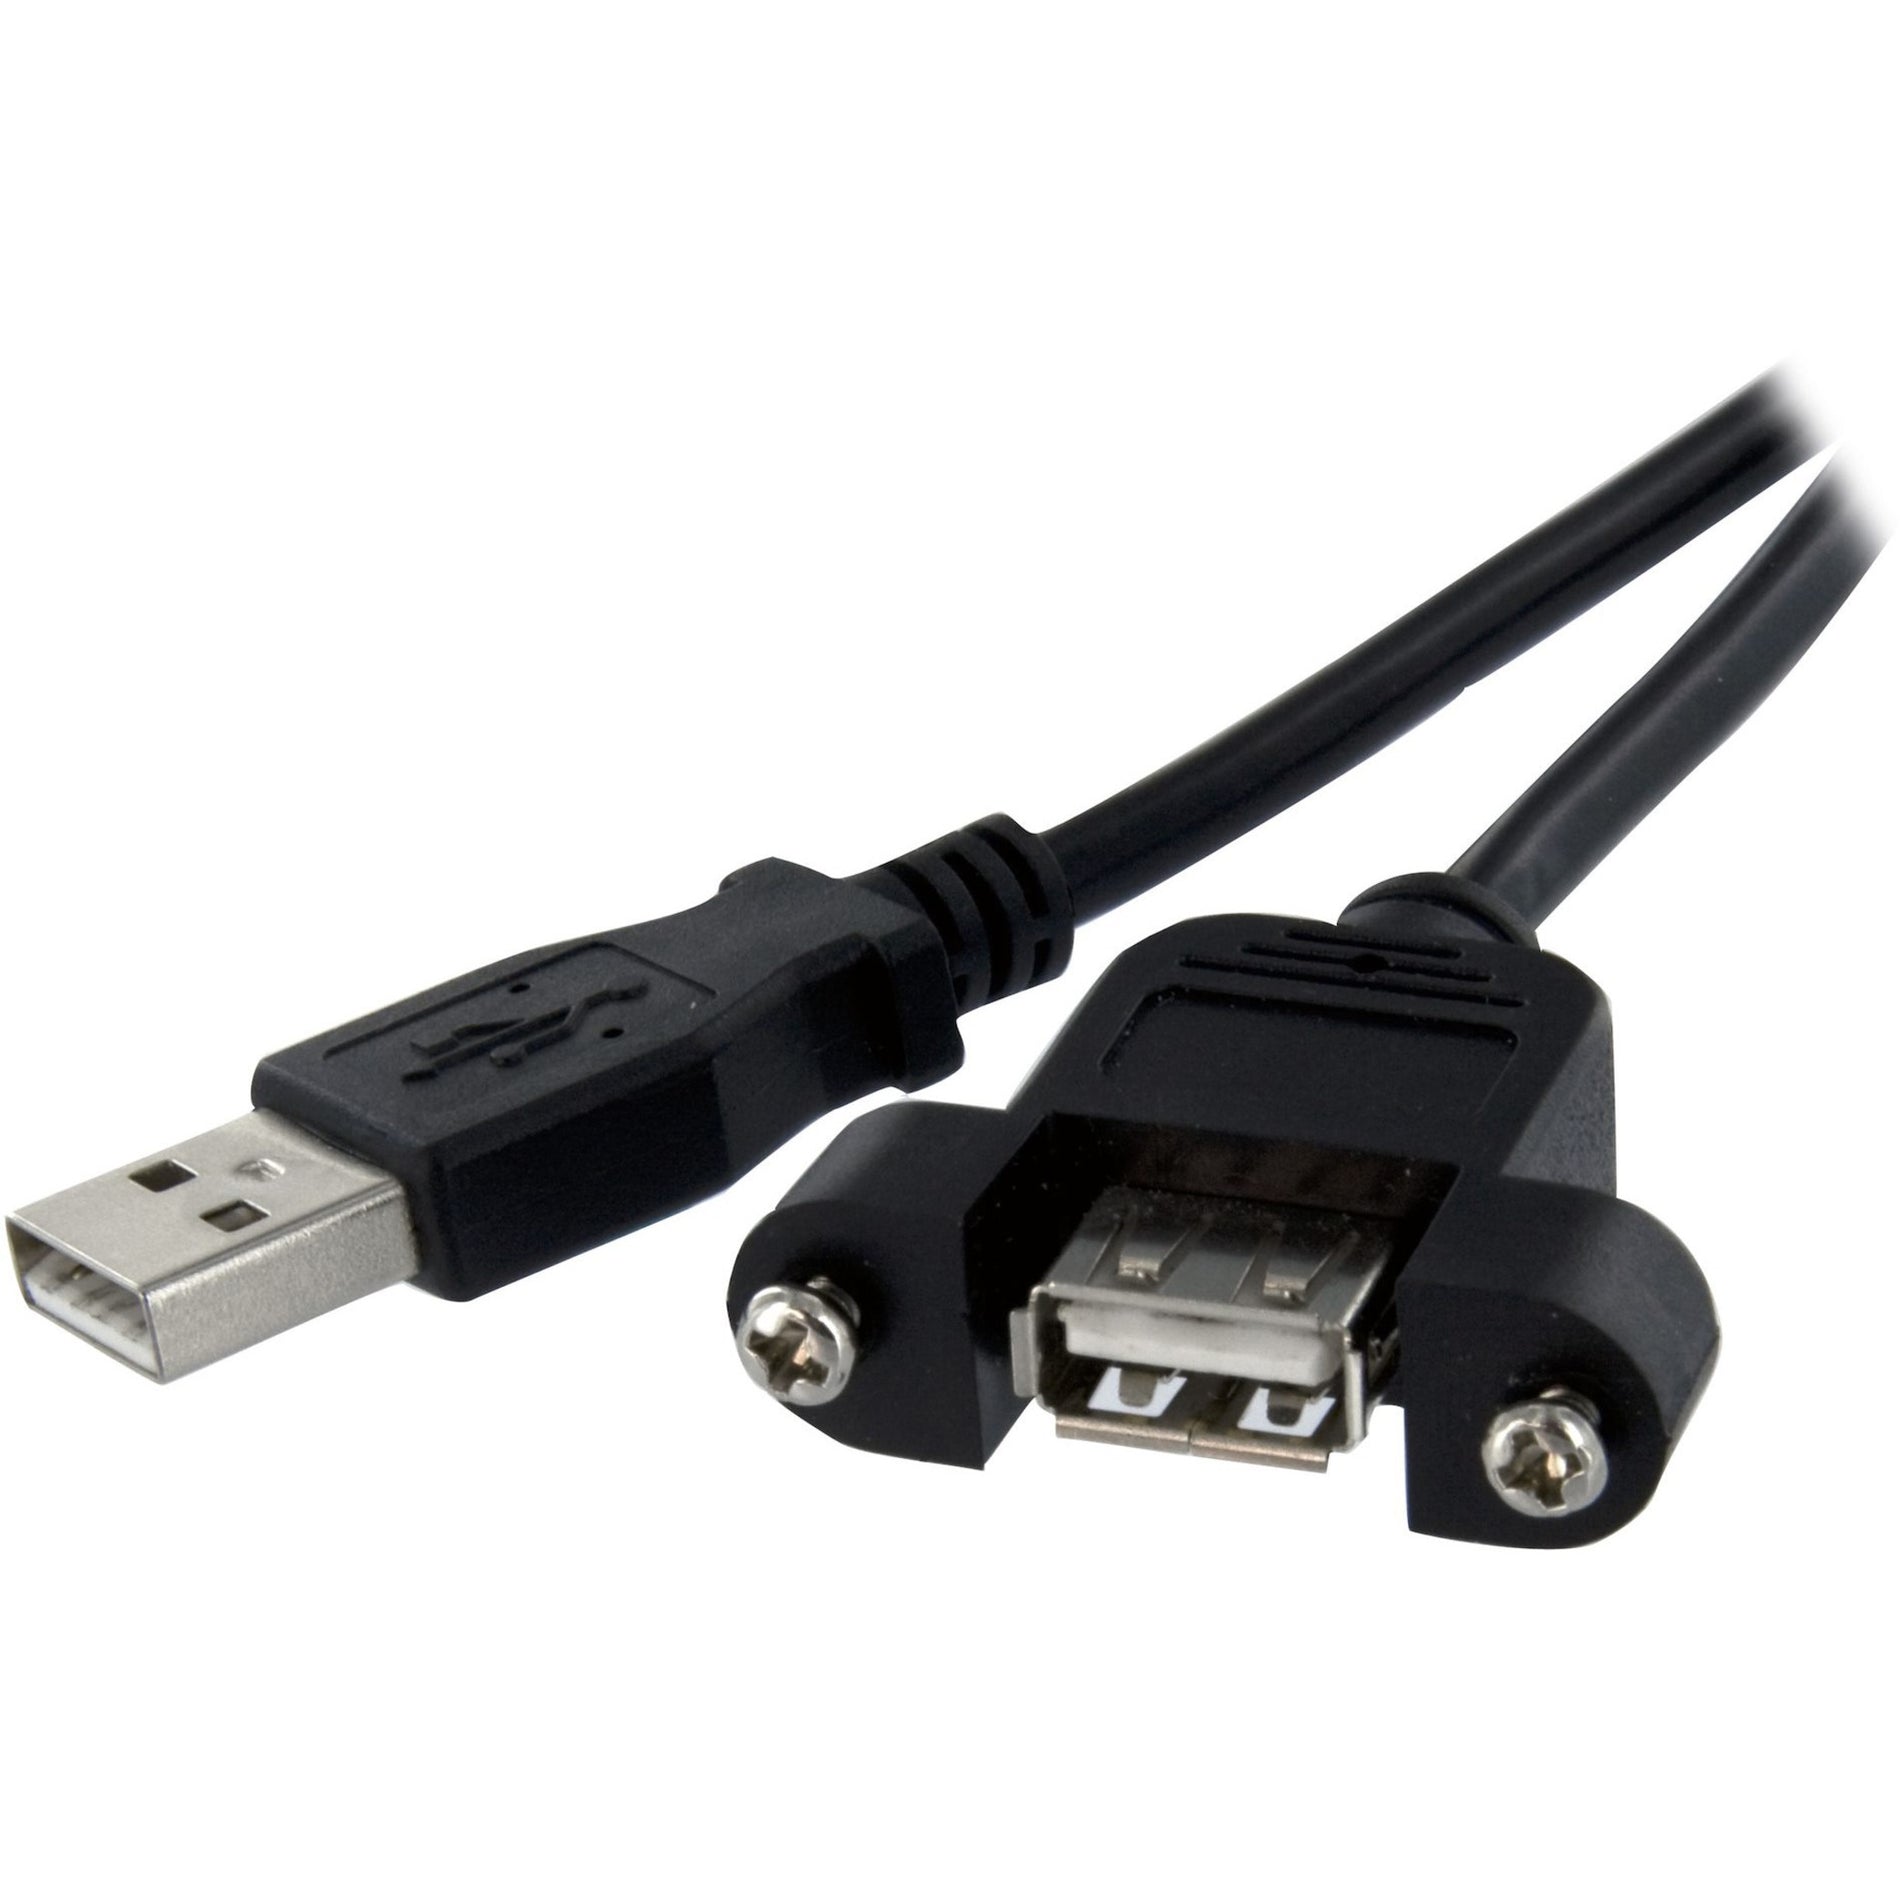 StarTech.com USBPNLAFAM3 3 ft Panel Mount USB Cable A to A - F/M, Data Transfer Cable